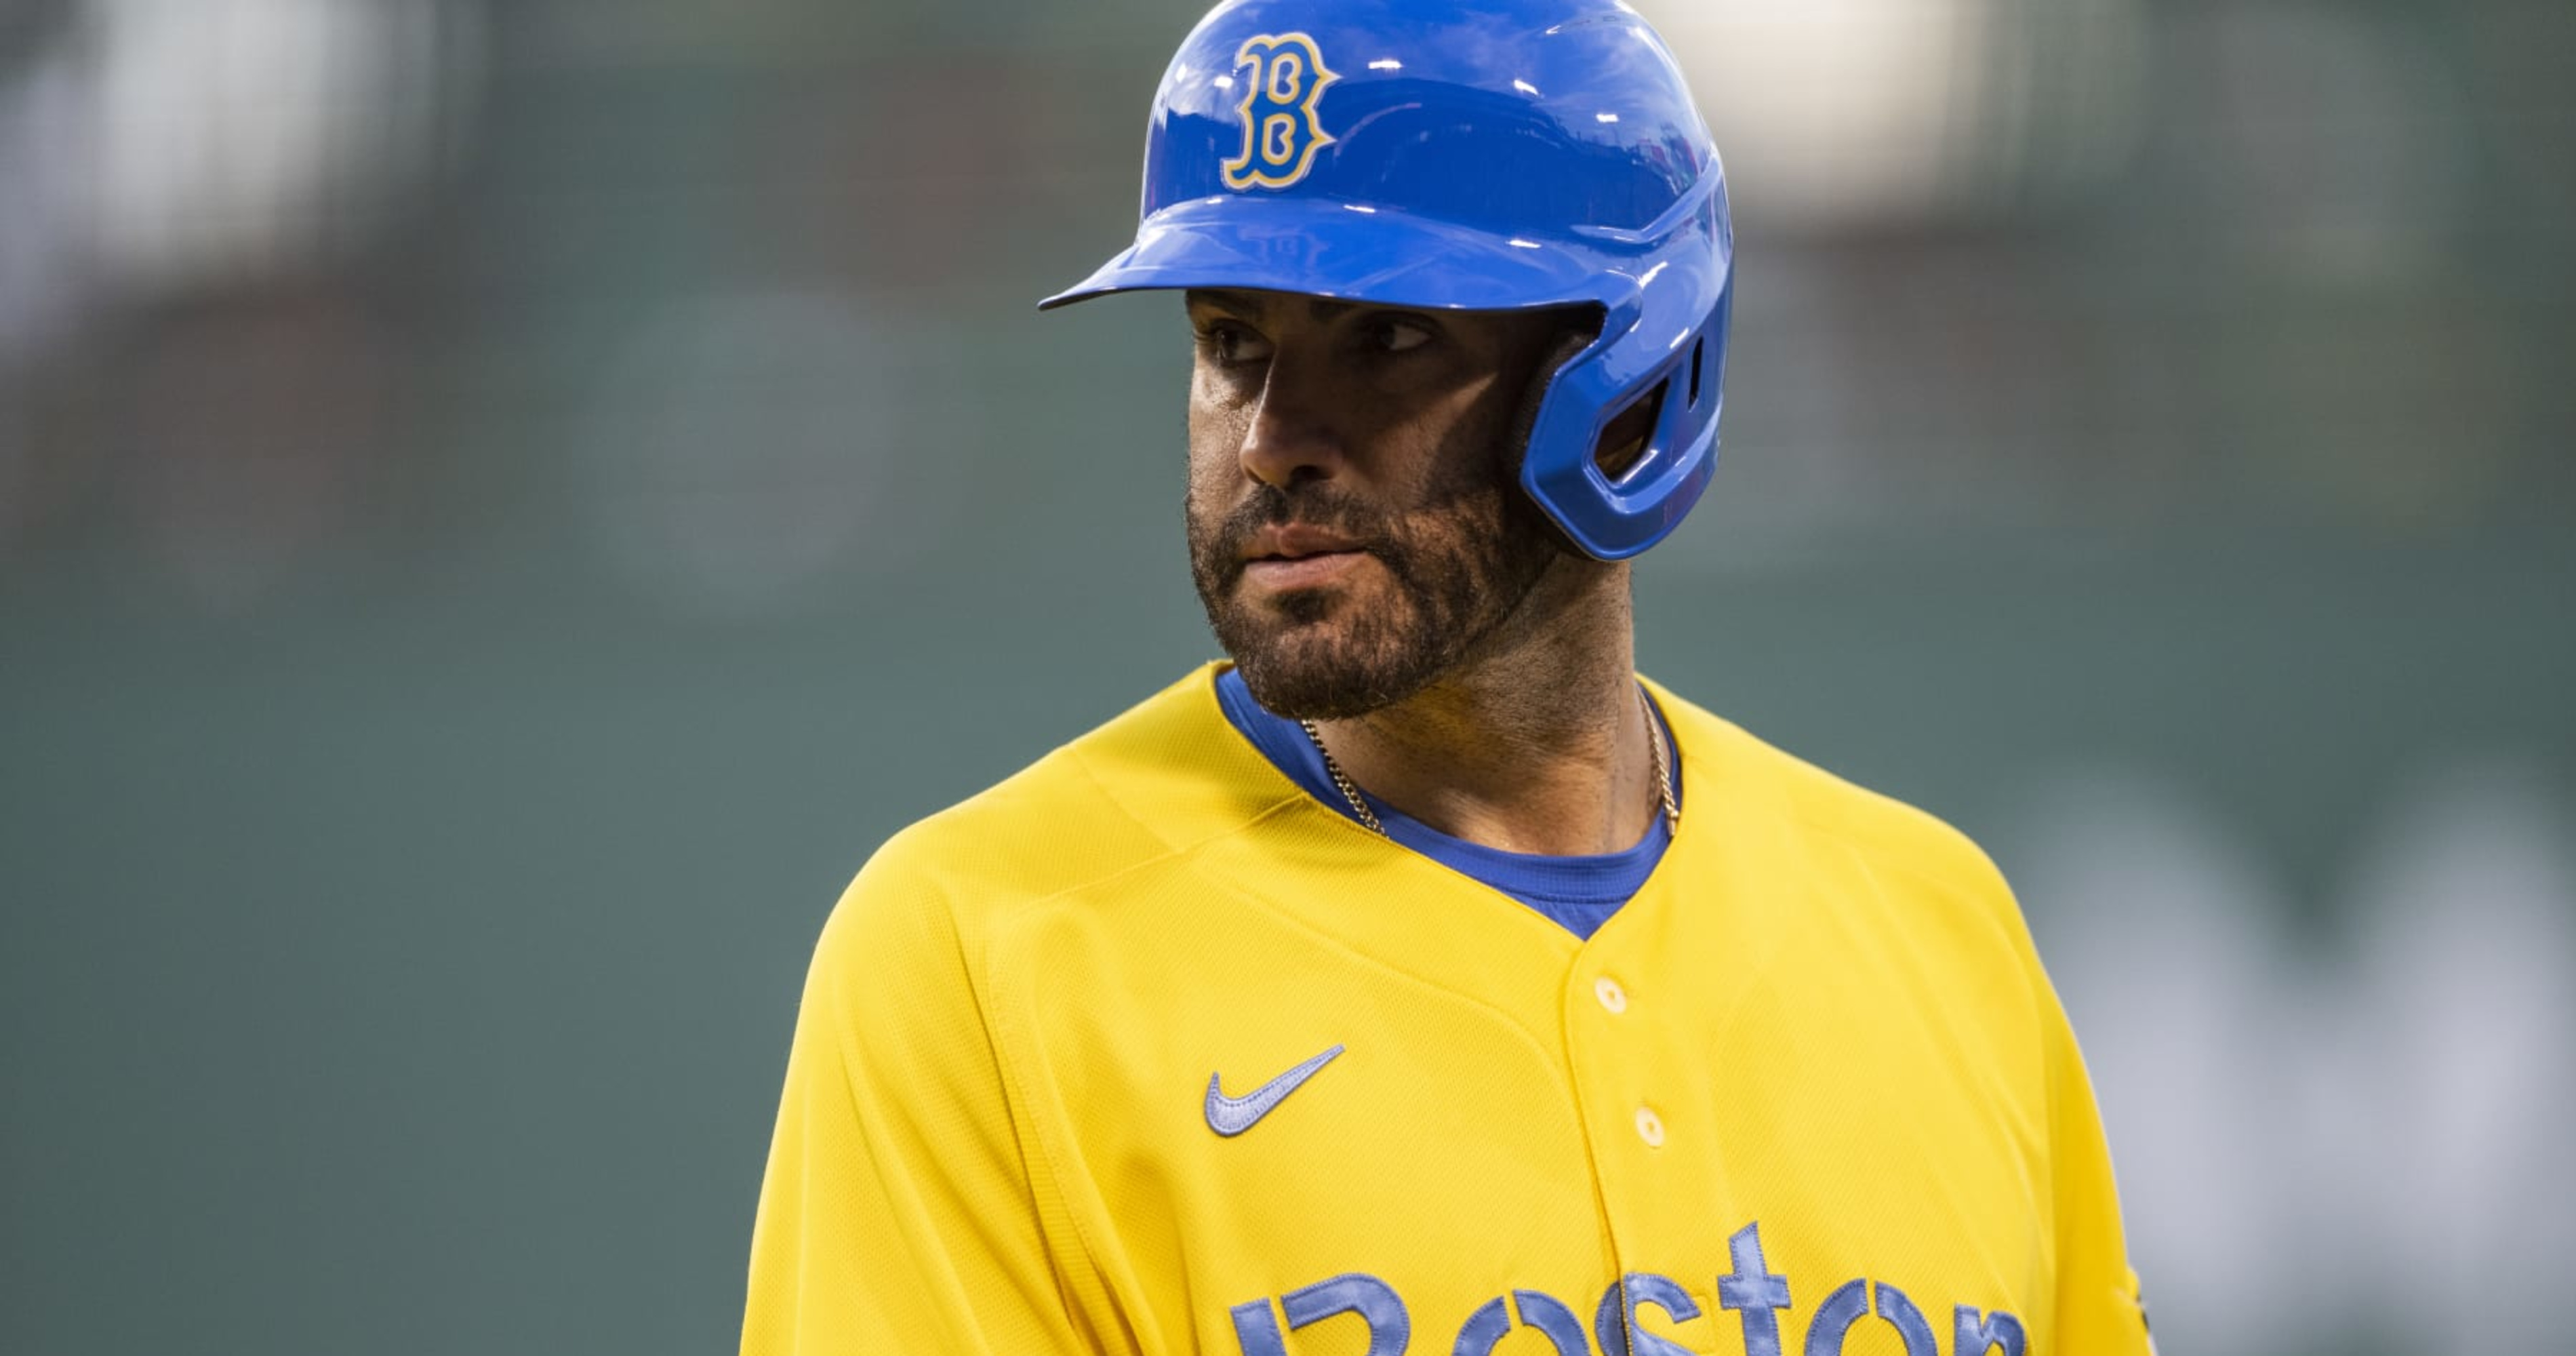 Boston Red Sox trade rumors: J.D. Martinez 'available' in possible